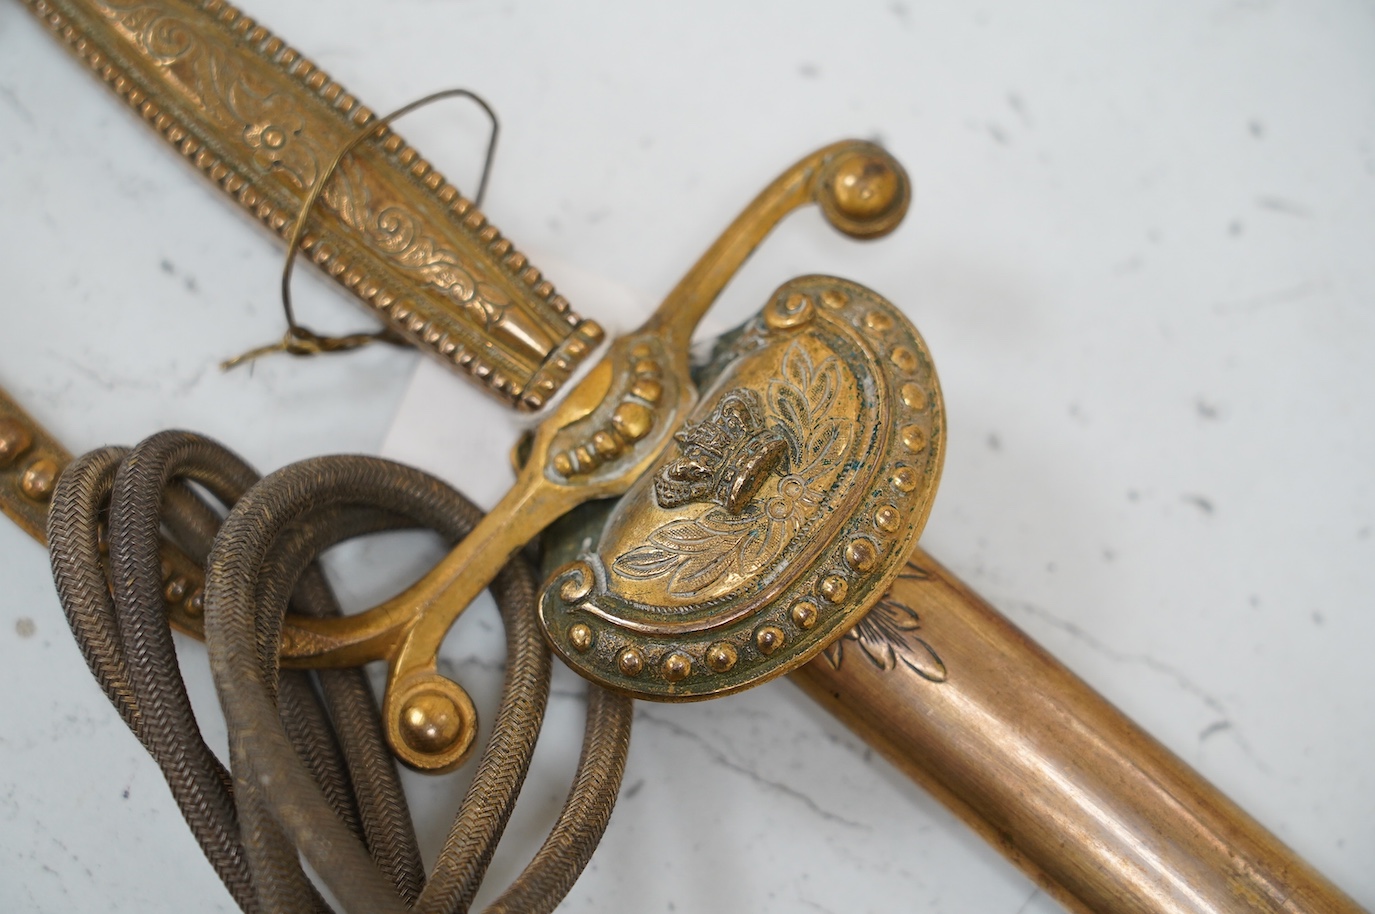 A late Victorian court sword gilt brass hilt with crown on guard, beaded edges, bullion dress knots, in its leather scabbard, blade 78cm. Condition - fair to good